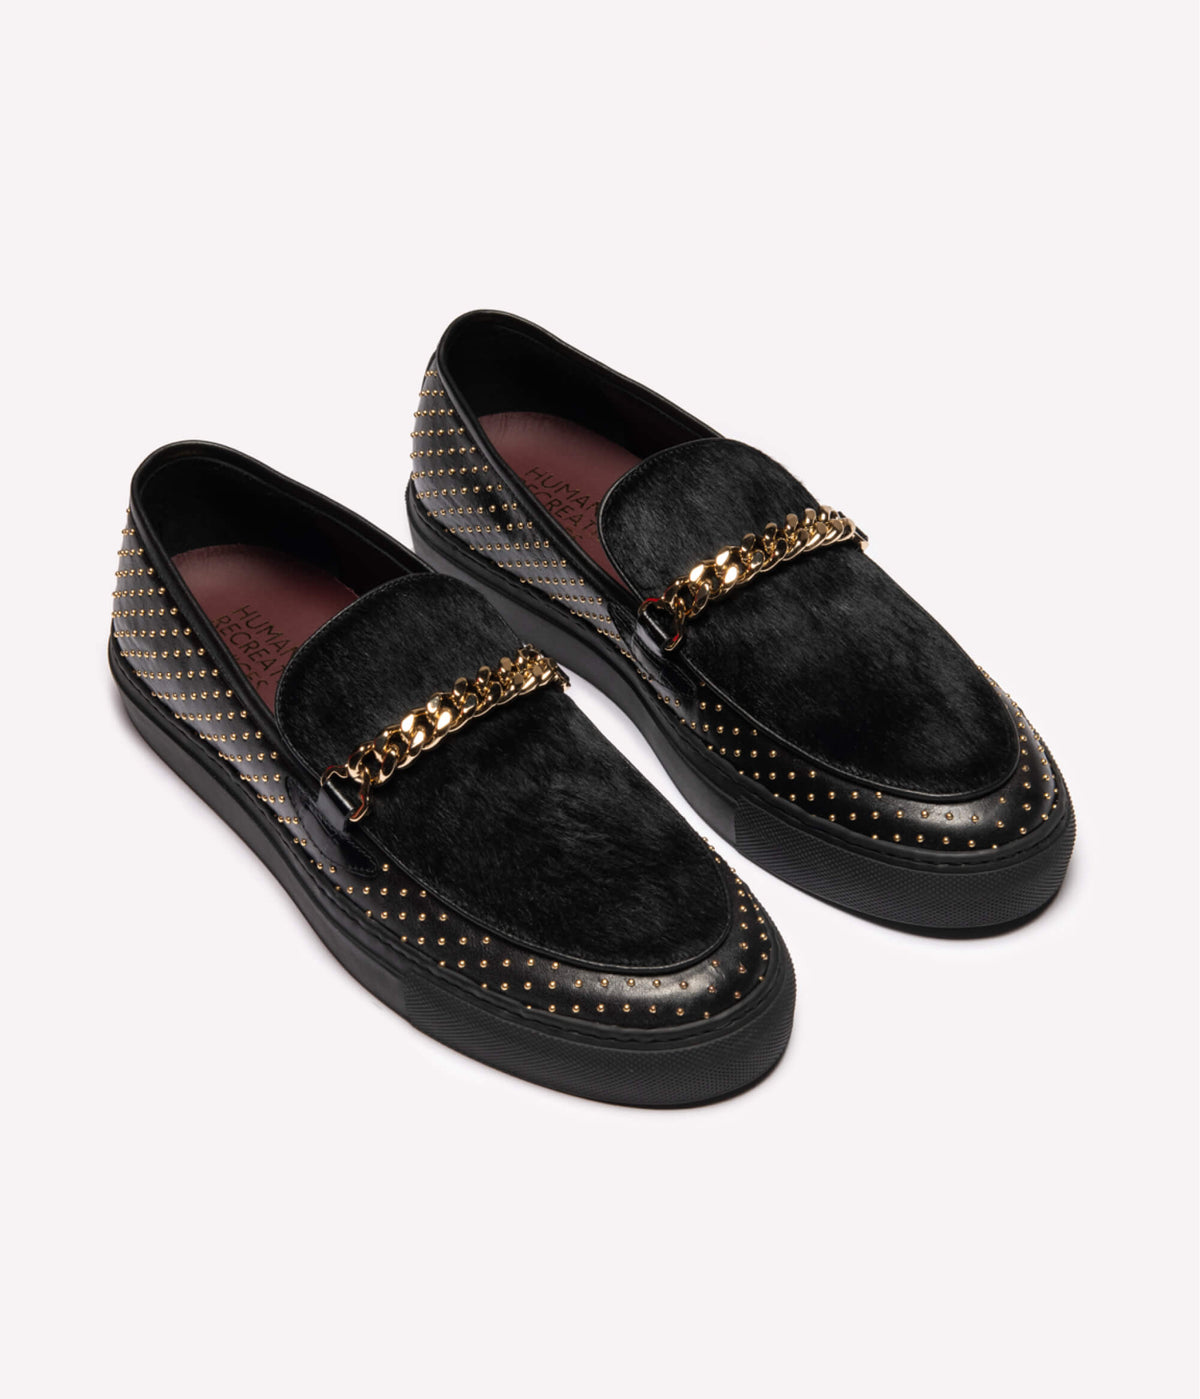 HUMAN RECREATIONAL SERVICES EL DORADO STUD BLACK LOAFER WITH A CUBAN LINK CHAIN